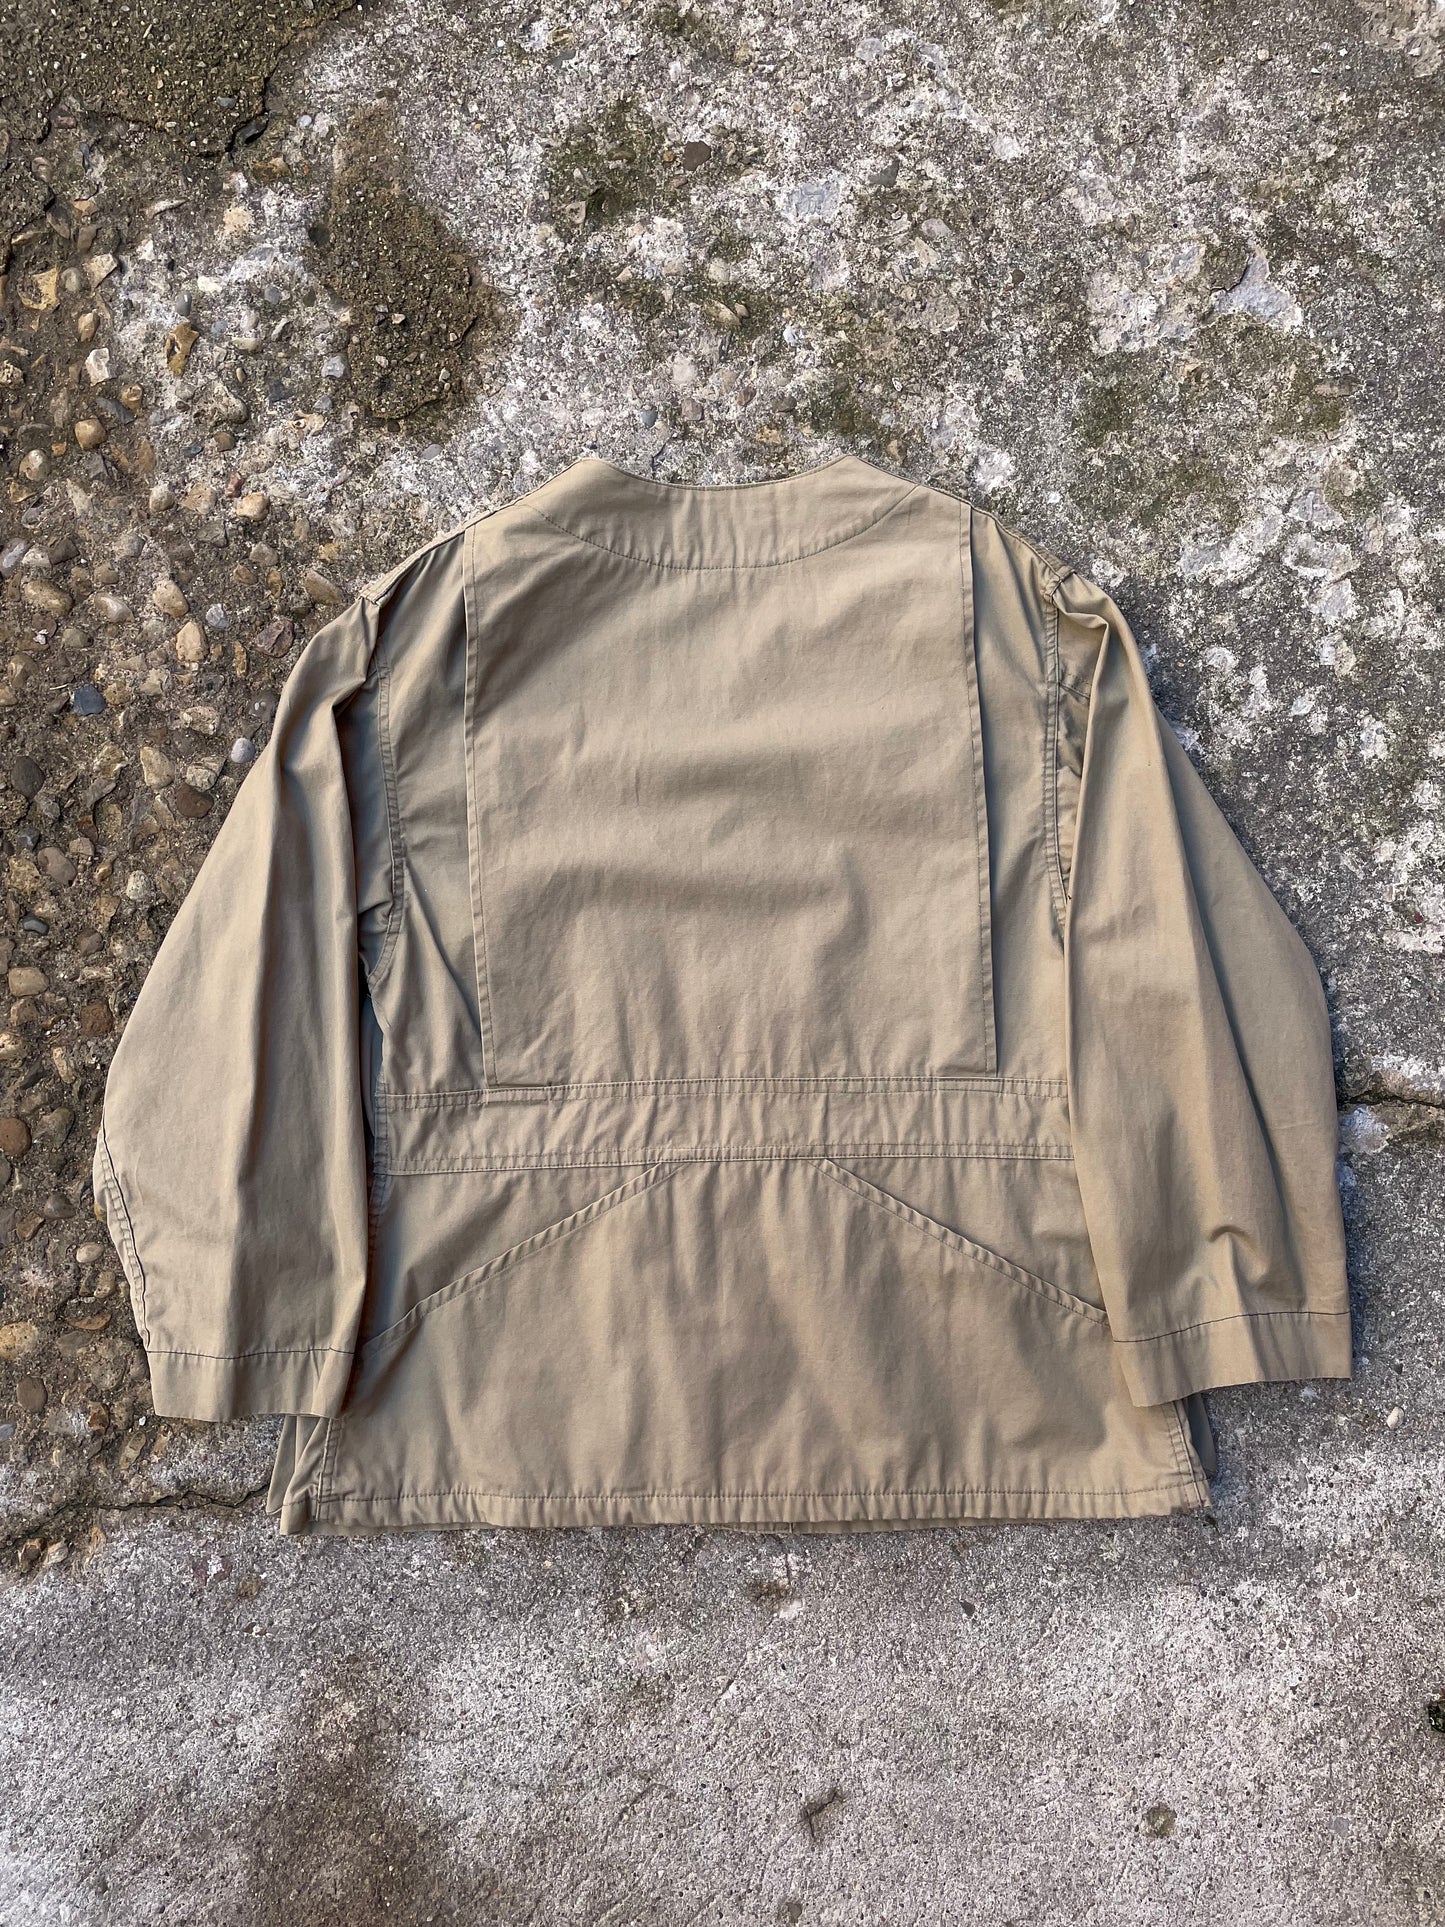 1960's SE Woods by Falcon Brand Hunting Jacket - L